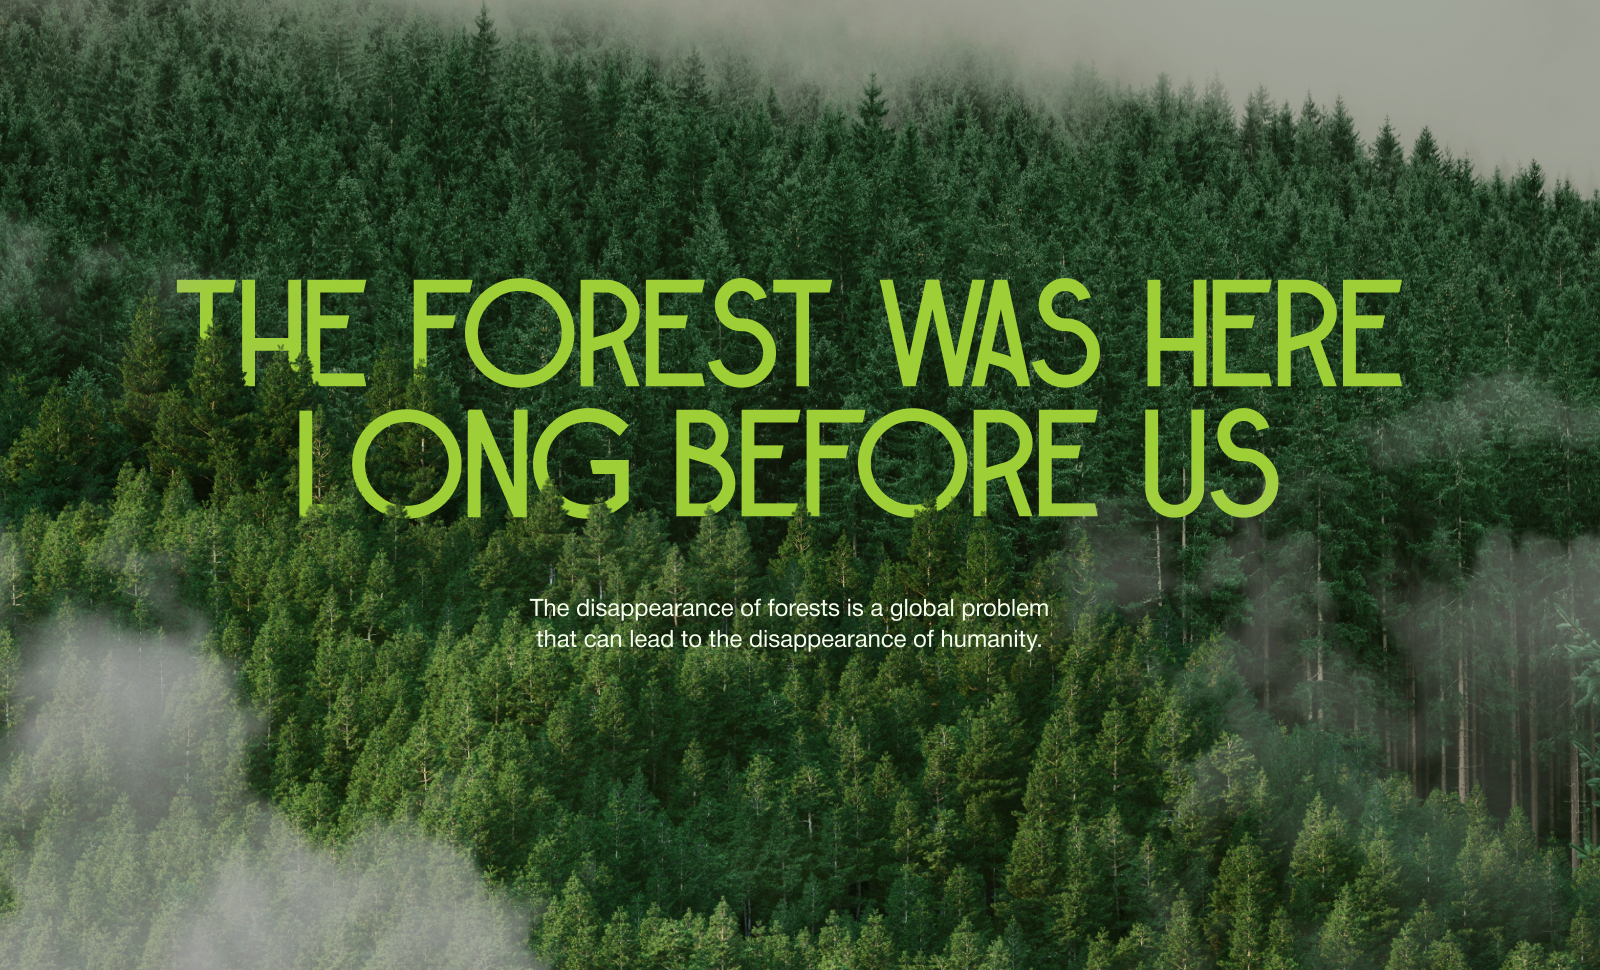 The forest is the lungs of our planet